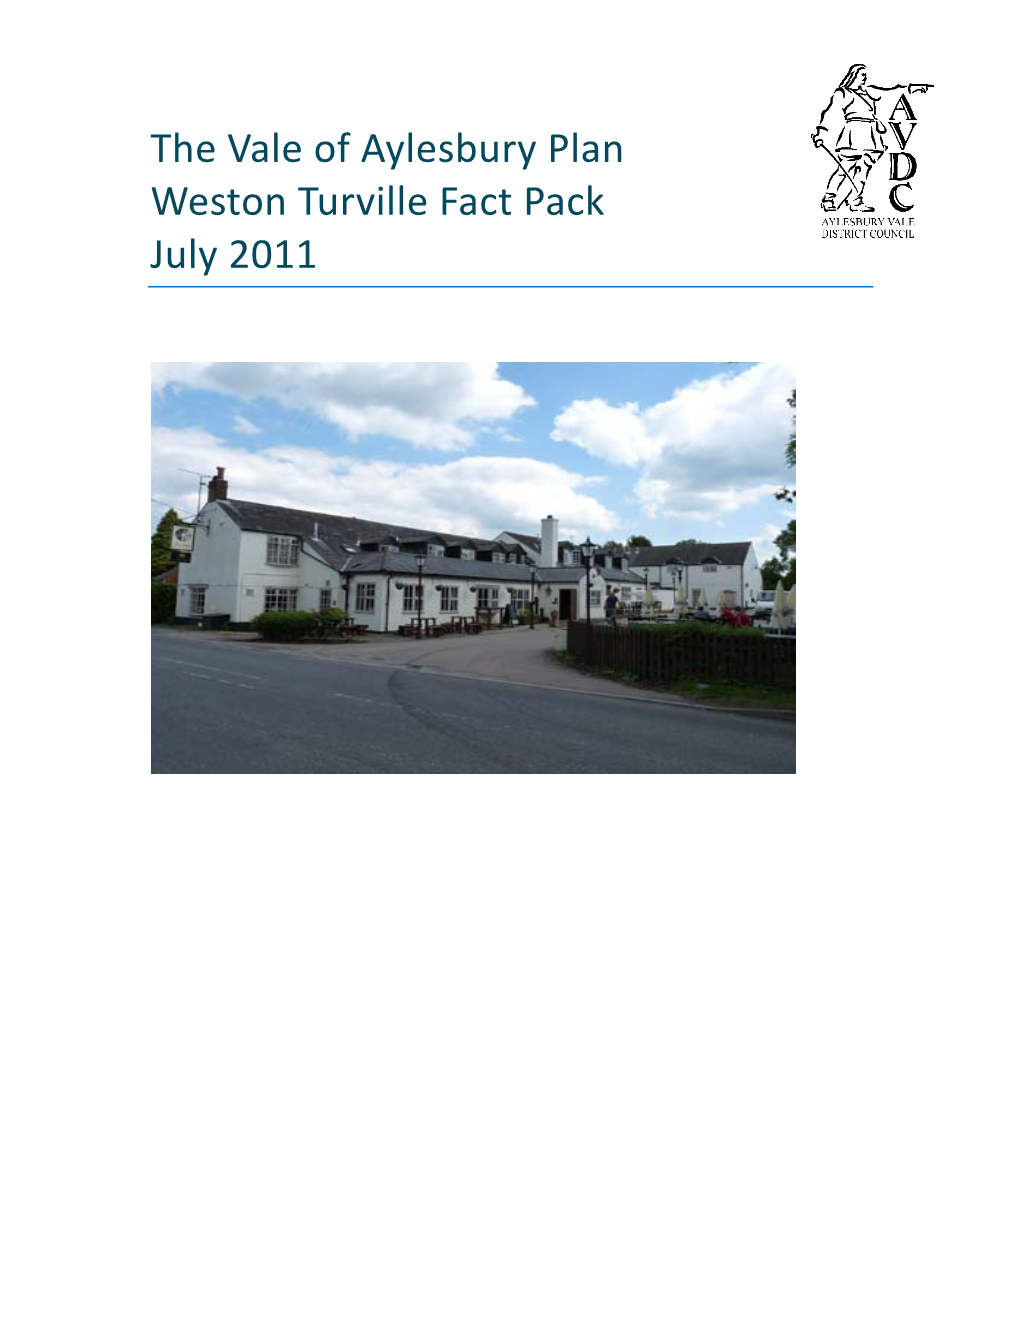 The Vale of Aylesbury Plan Weston Turville Fact Pack July 2011